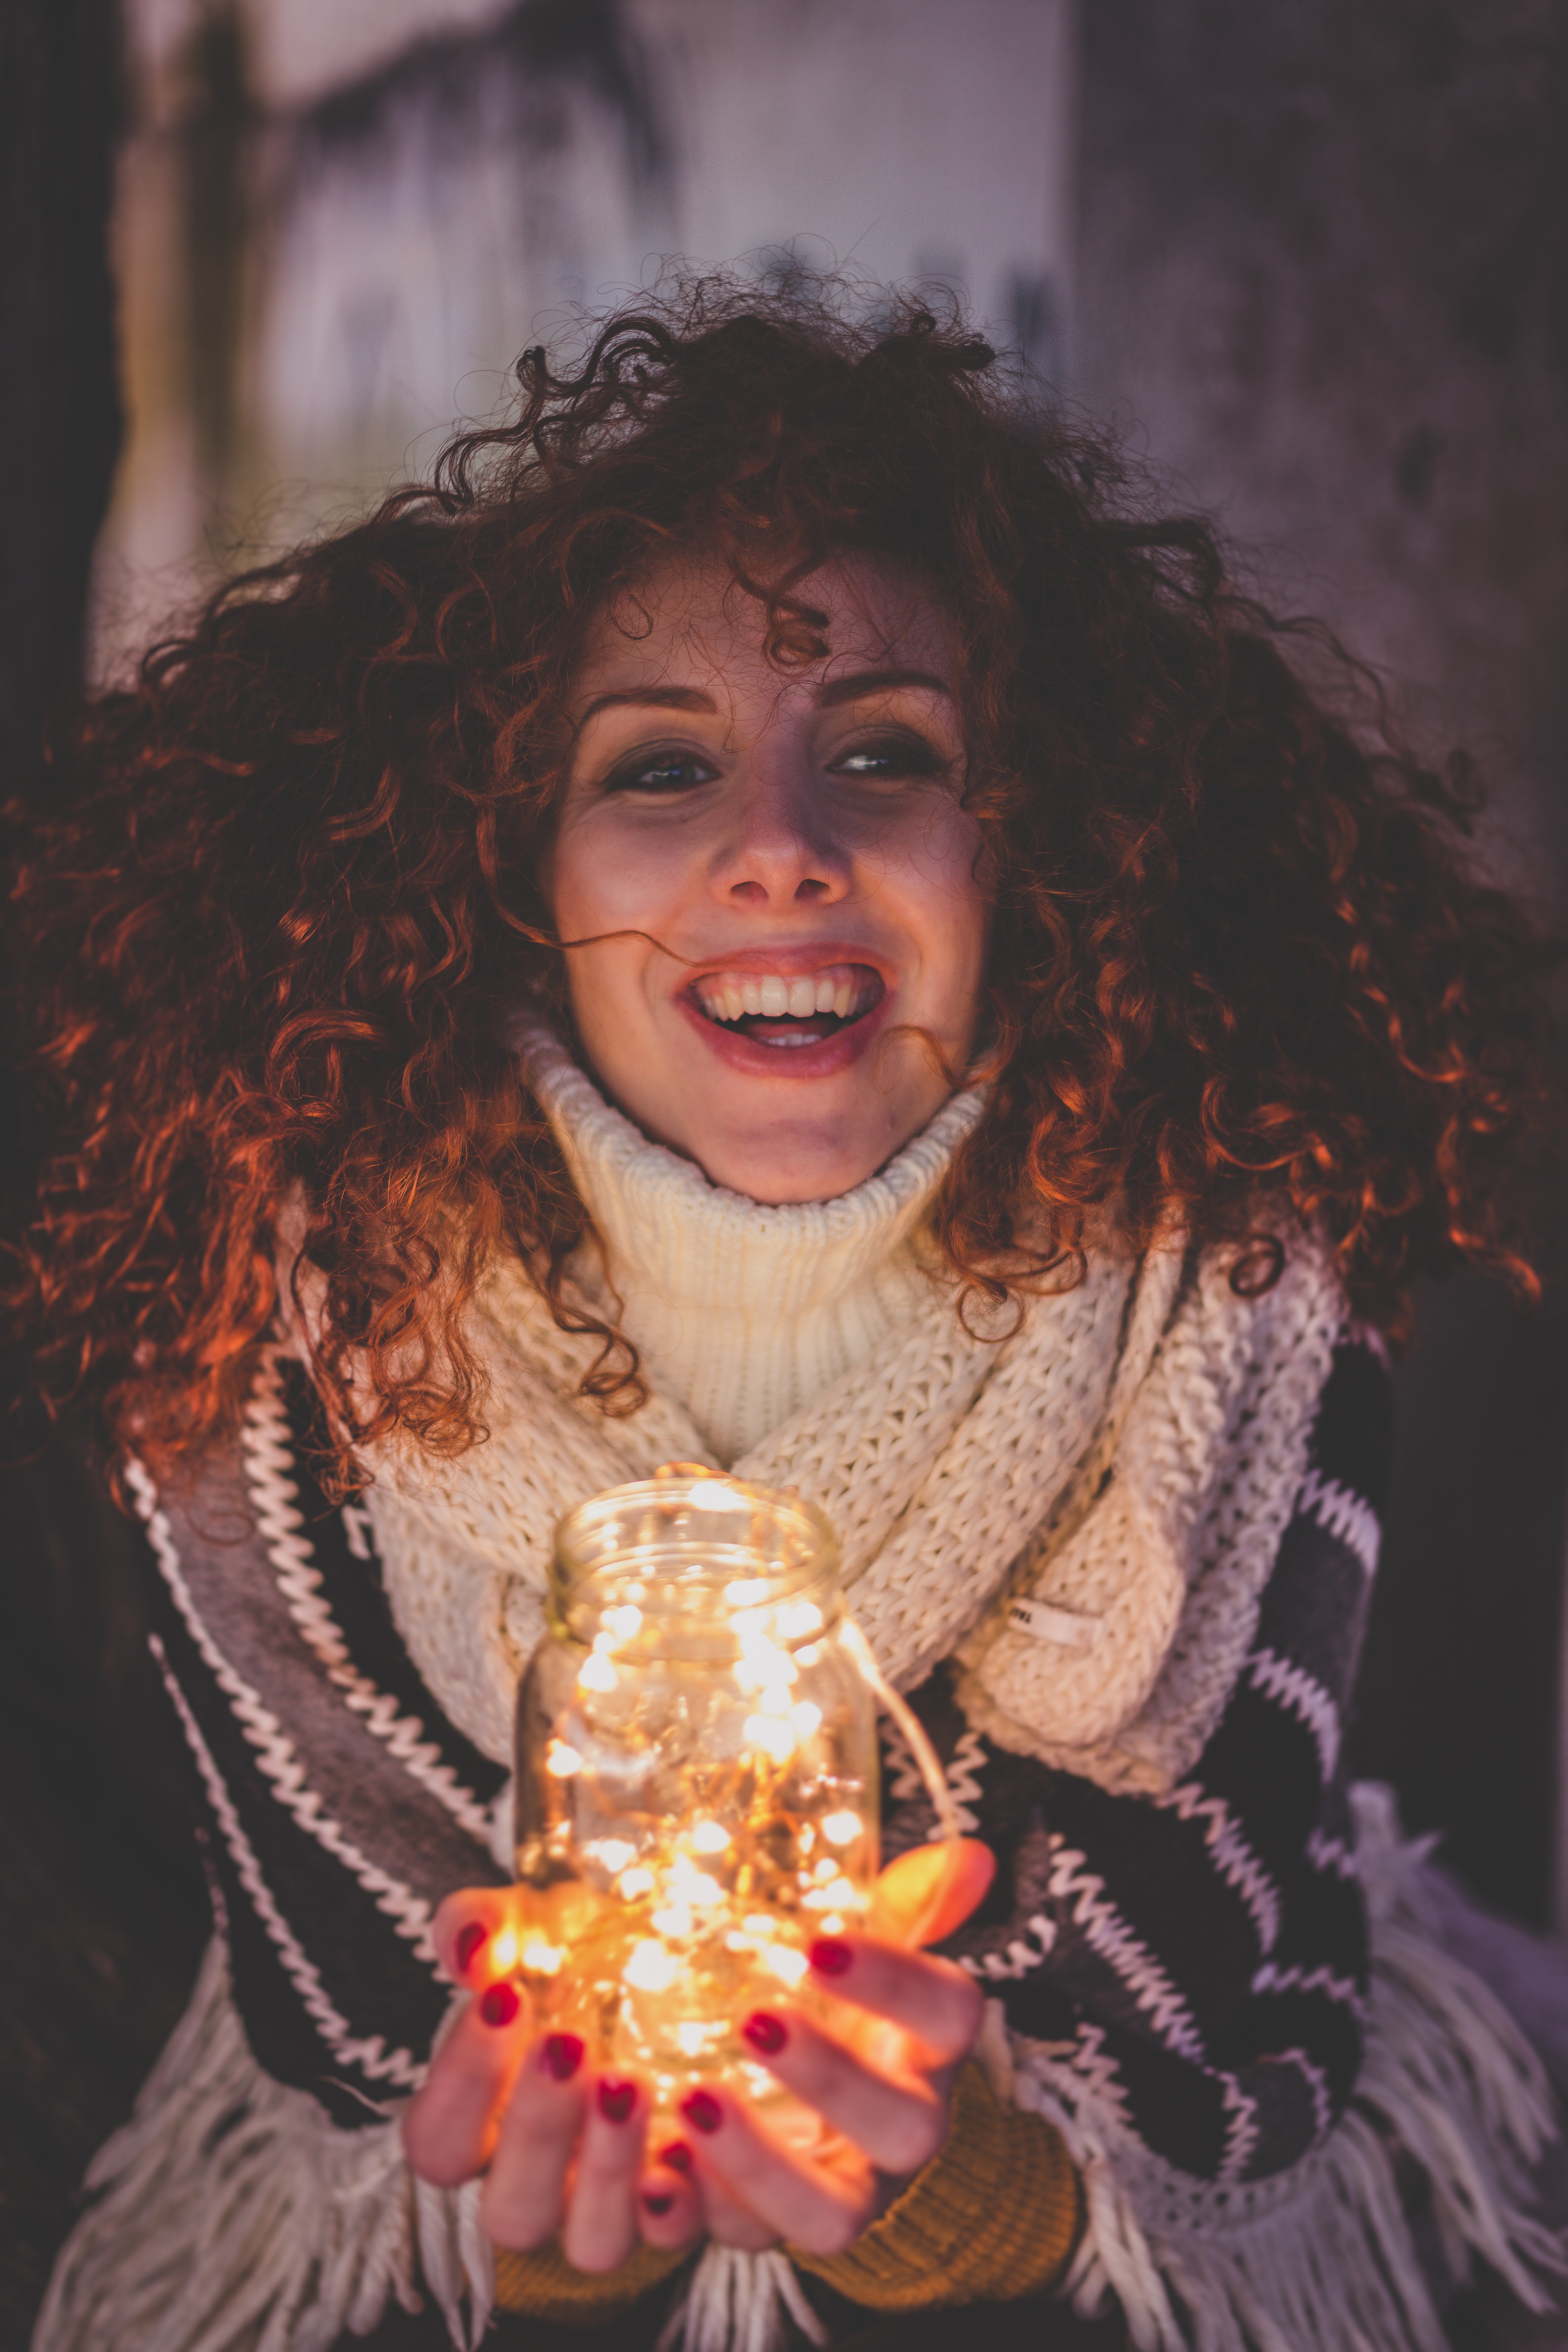 Woman holding a jar with string lights photo